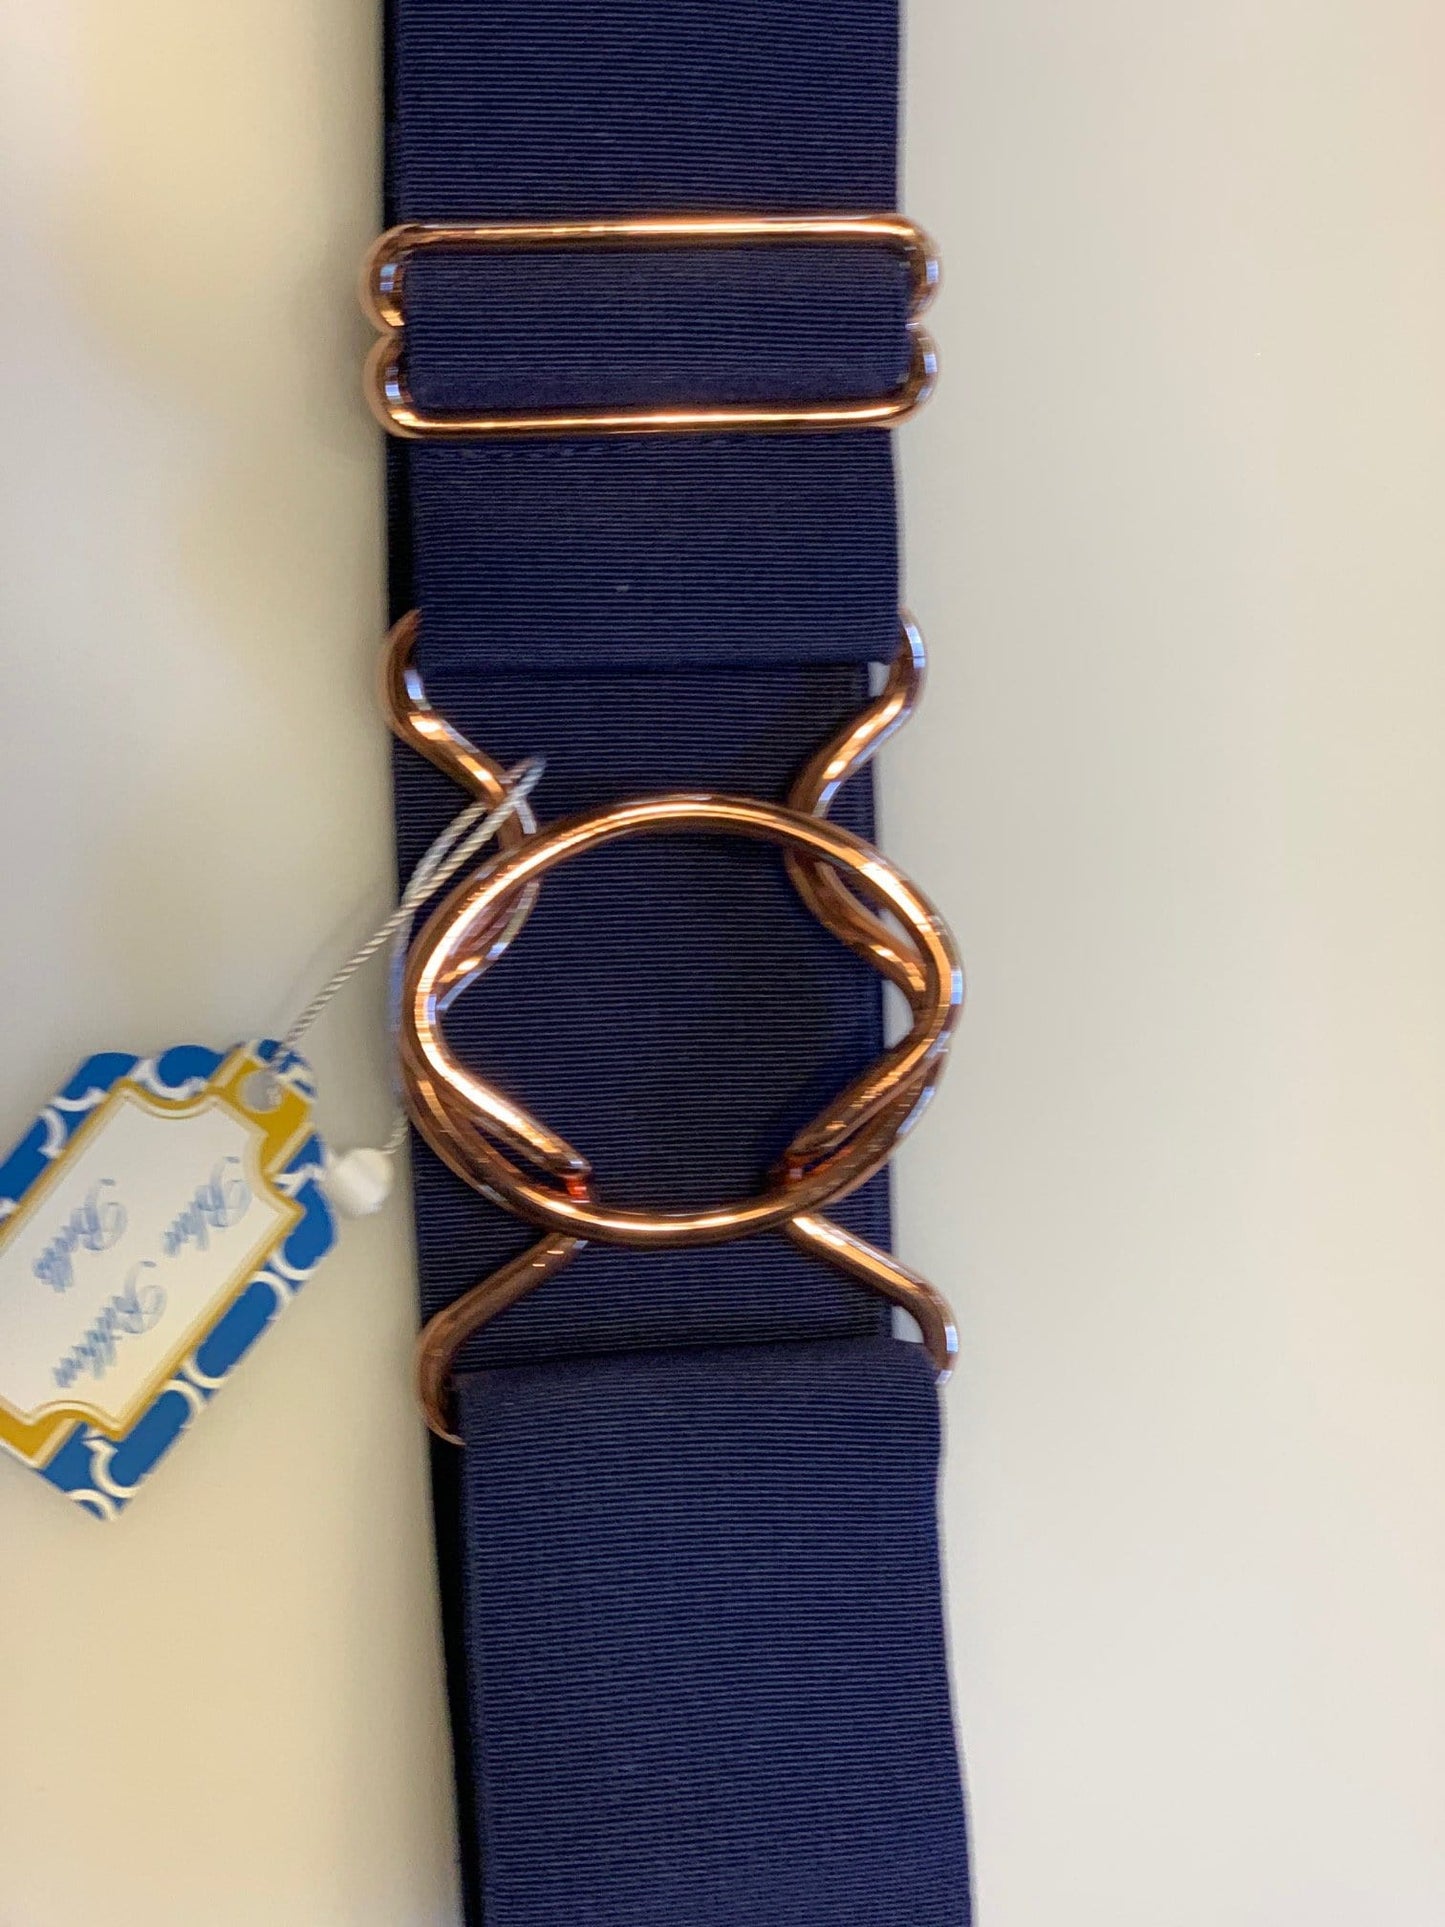 Blue Ribbon Belts Belt Navy with Rose Gold Buckle Blue Ribbon Belts - 2 Inch equestrian team apparel online tack store mobile tack store custom farm apparel custom show stable clothing equestrian lifestyle horse show clothing riding clothes horses equestrian tack store